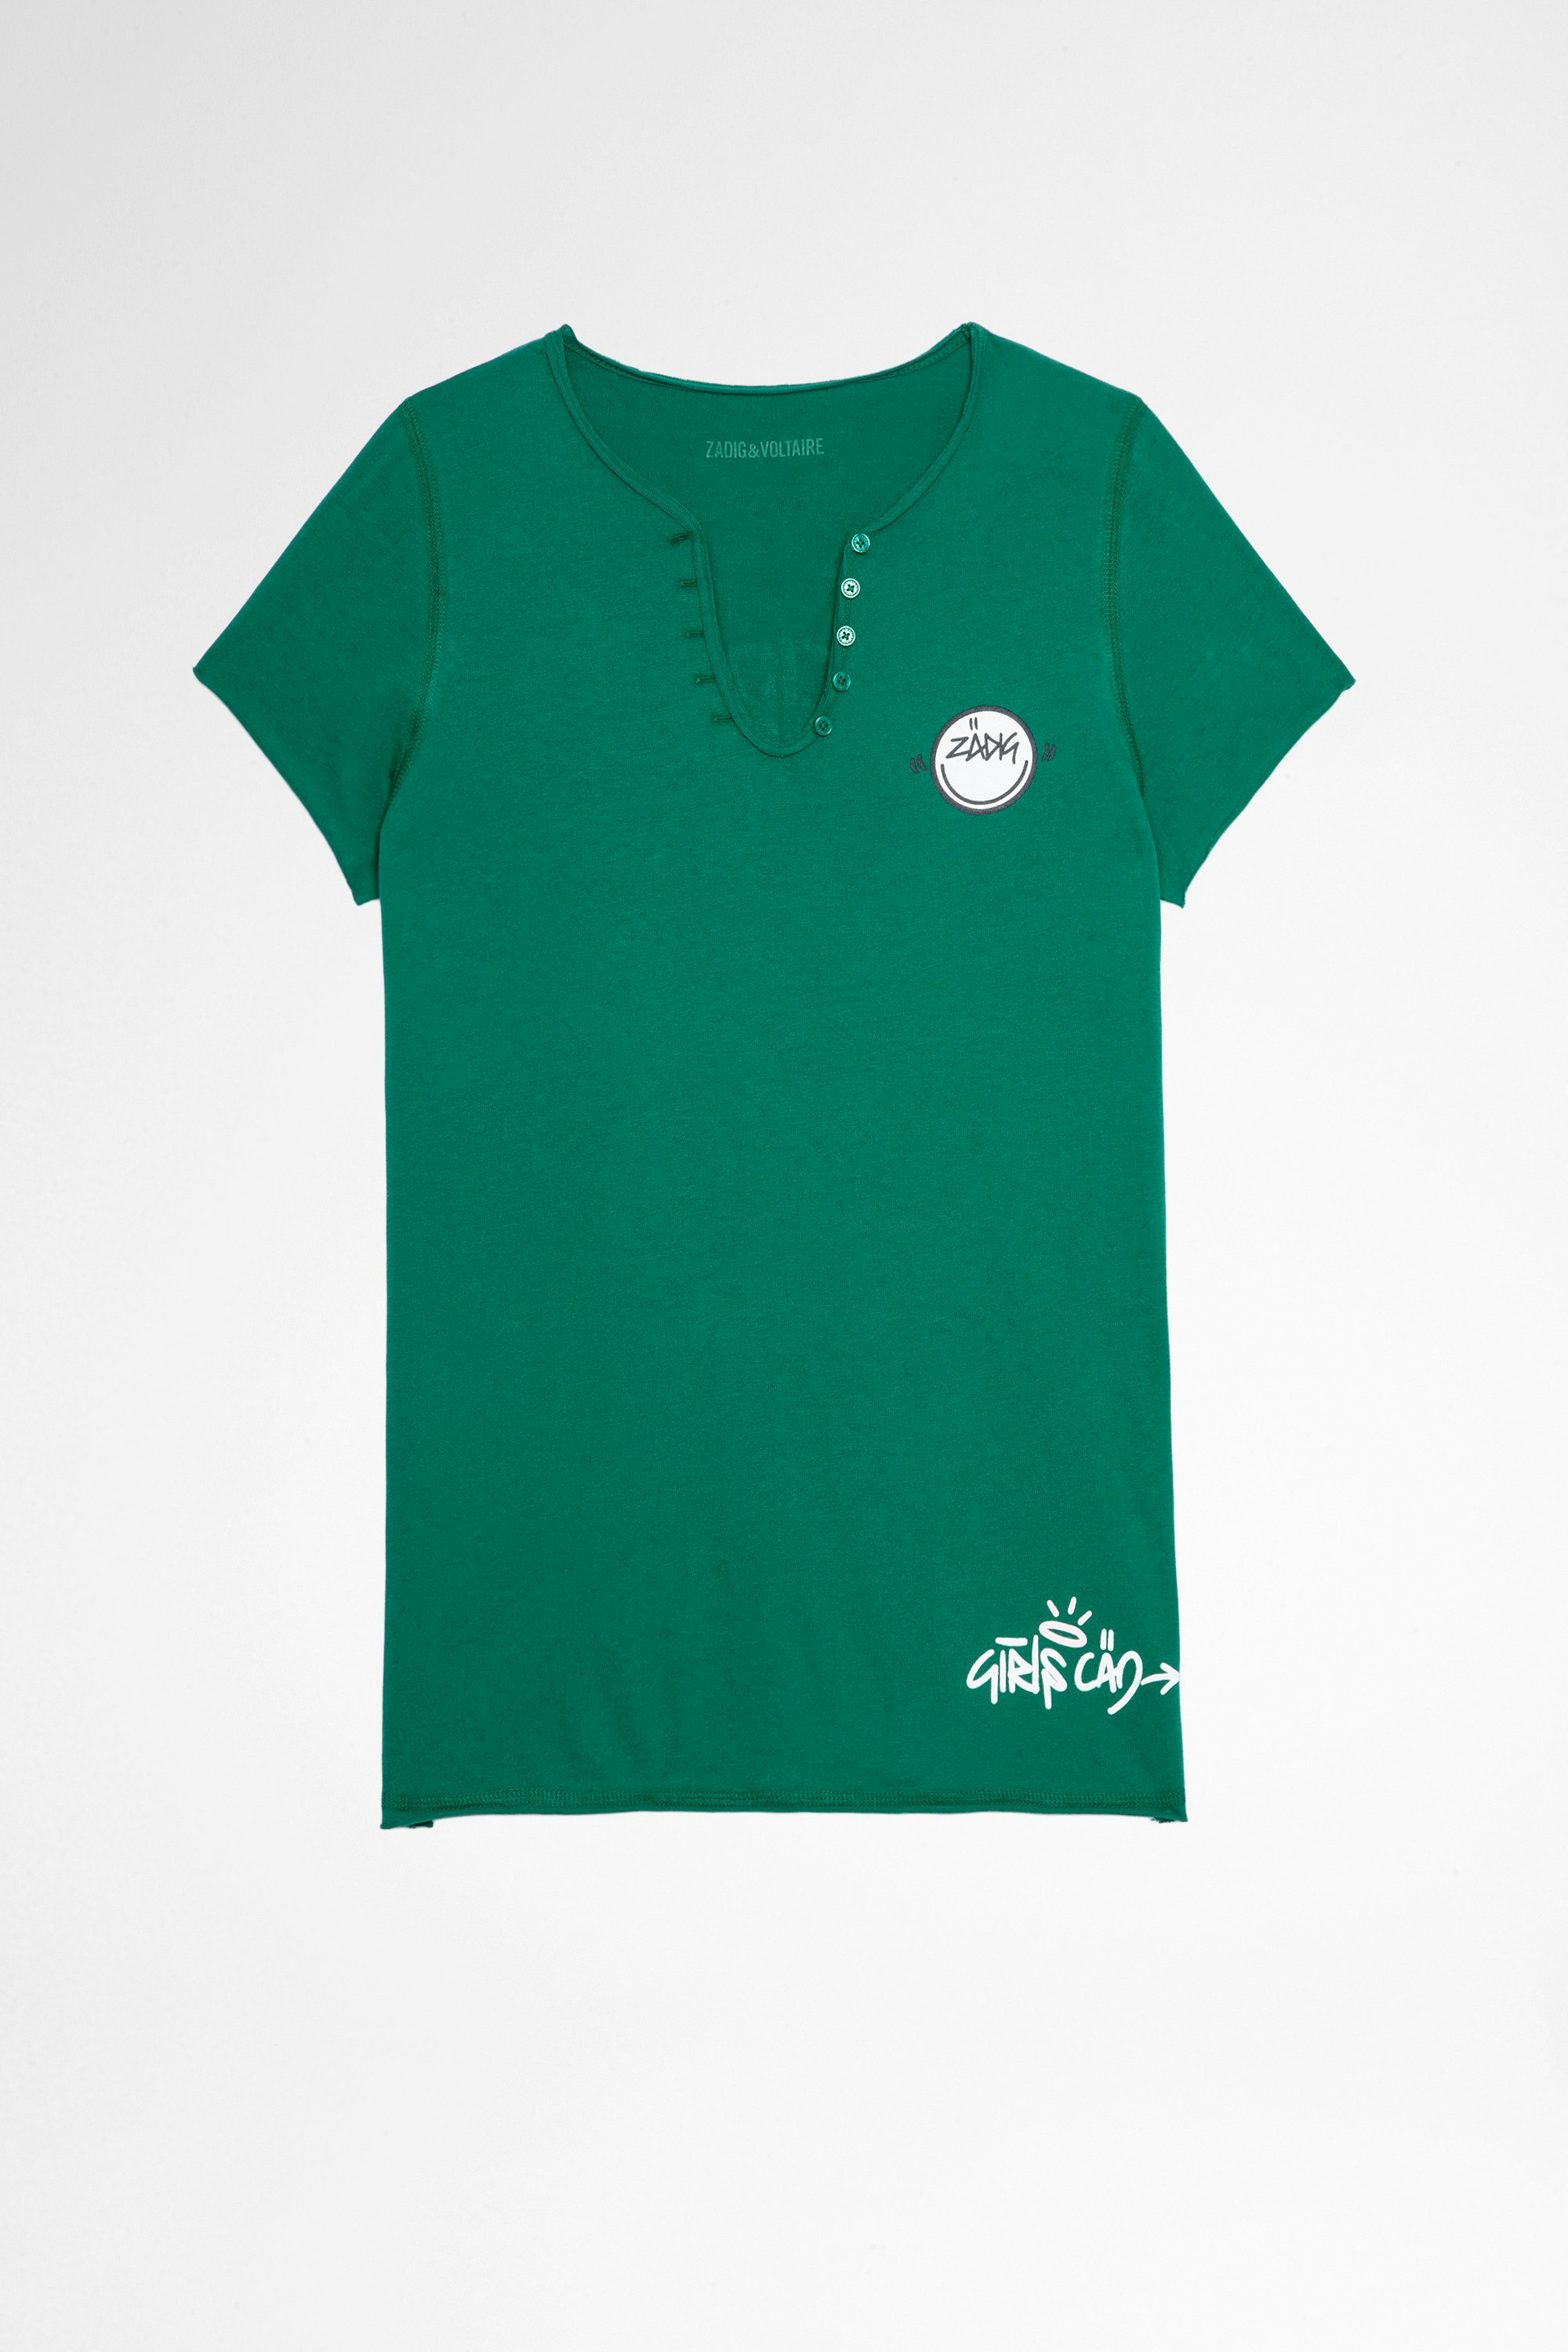 Multicusto Henley T-shirt Girls can do anything women's green cotton Henley T-shirt. This product is GOTS certified and made with fibers from organic farming.